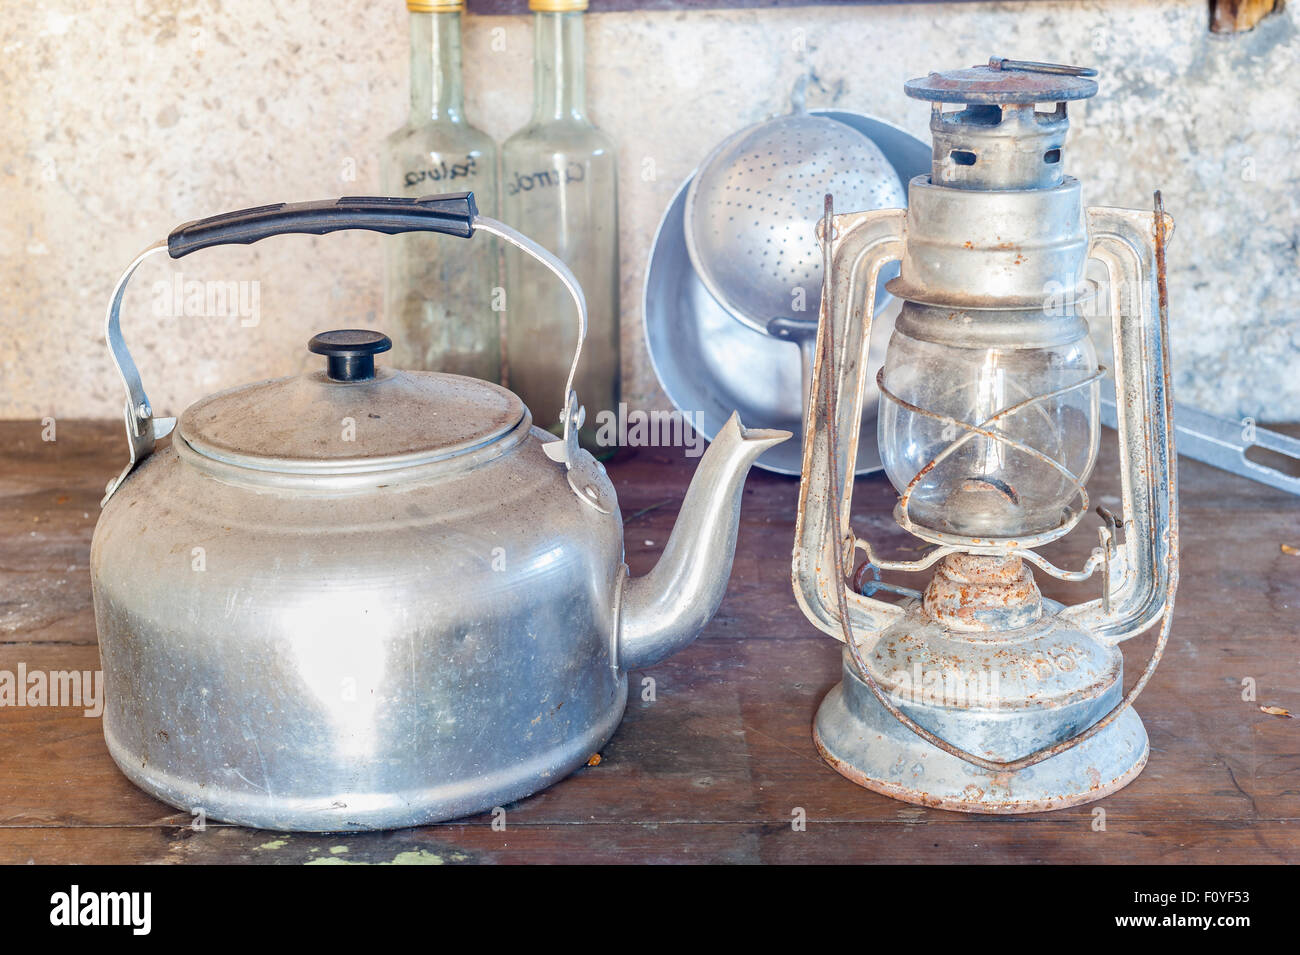 https://c8.alamy.com/comp/F0YF53/old-objects-once-aluminum-kettle-and-old-acetylene-lamp-F0YF53.jpg